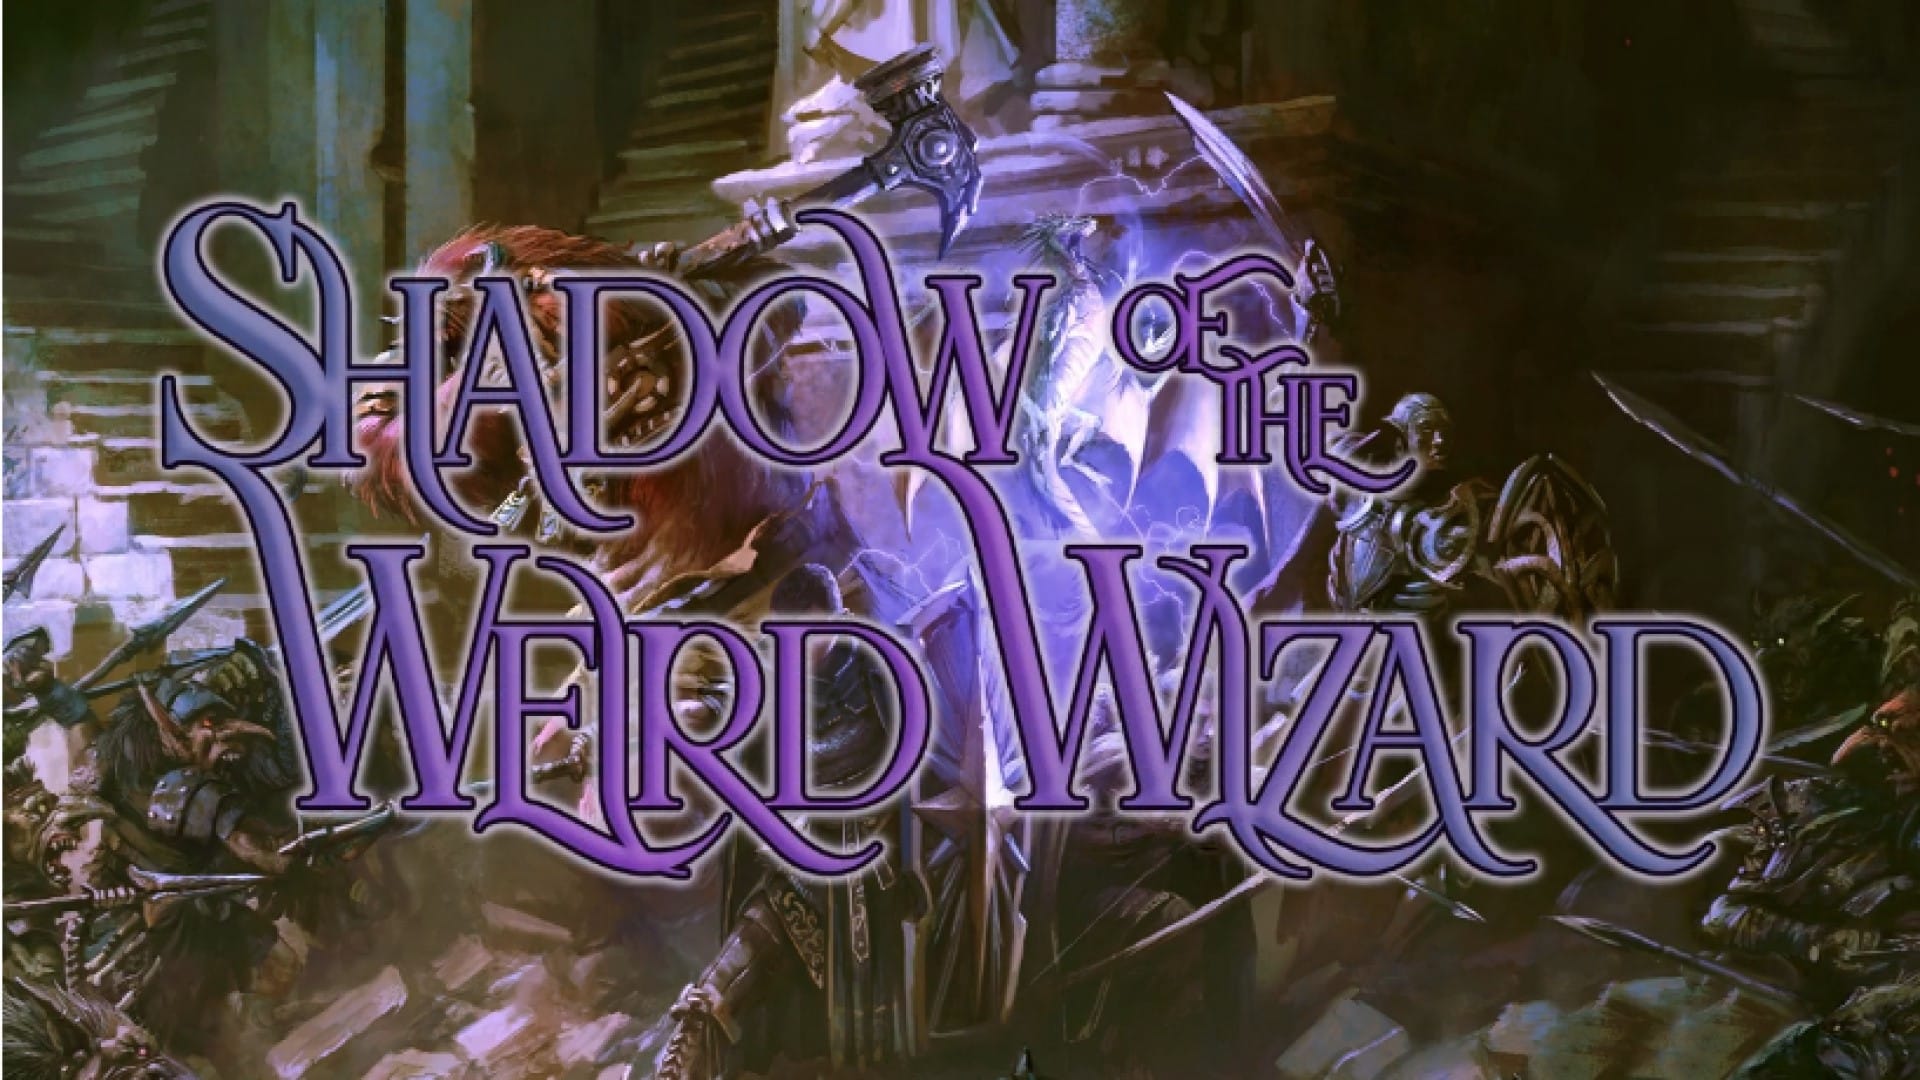 Shadow of the Weird Wizard Kickstarter Funded In One Day